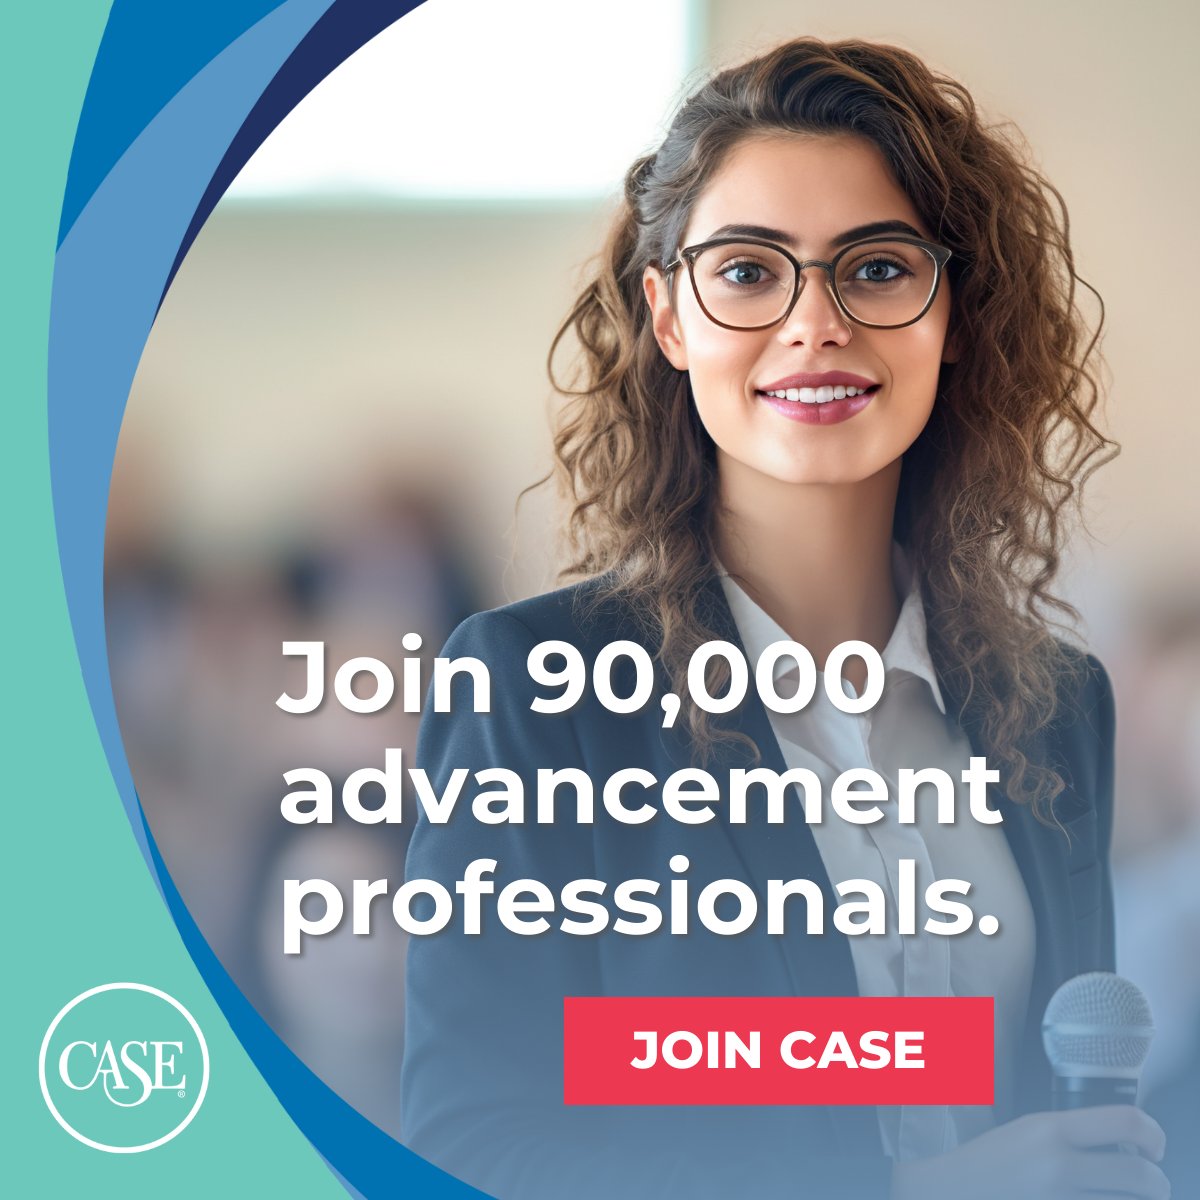 But even with lots of irons in the fire, you can still get ahead in your professional career. Join 90,000 other advancement professionals engaging in meaningful conversations and sharing helpful insights. Here’s how: hubs.ly/Q027j3fg0